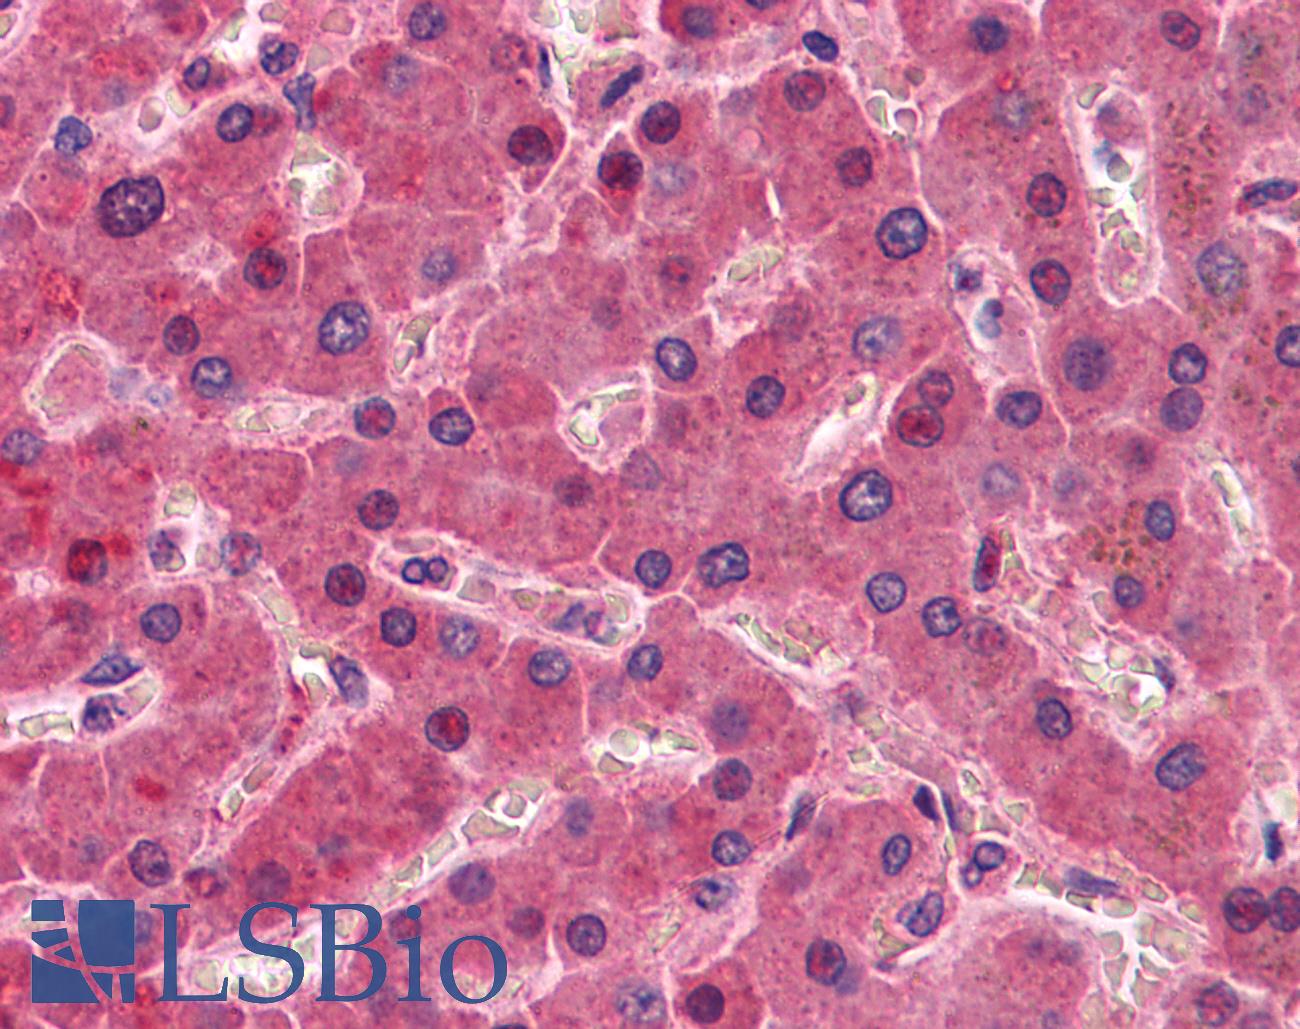 F12 / Factor XII Antibody - Anti-F12 / Factor XII antibody IHC of human liver. Immunohistochemistry of formalin-fixed, paraffin-embedded tissue after heat-induced antigen retrieval. Antibody concentration 5 ug/ml.